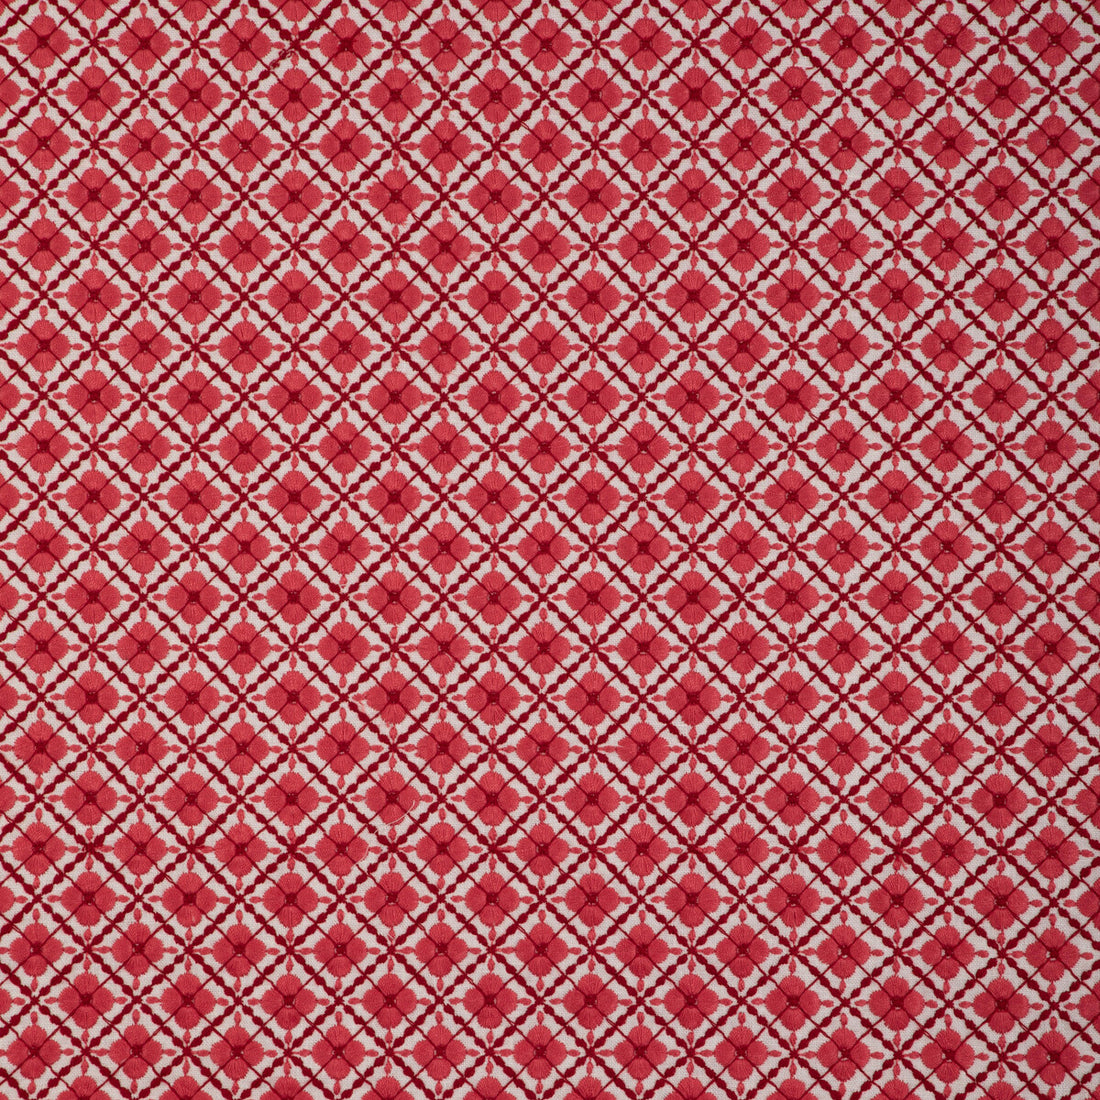 Ines Emb fabric in red color - pattern 8023119.99.0 - by Brunschwig &amp; Fils in the Anduze Embroideries collection